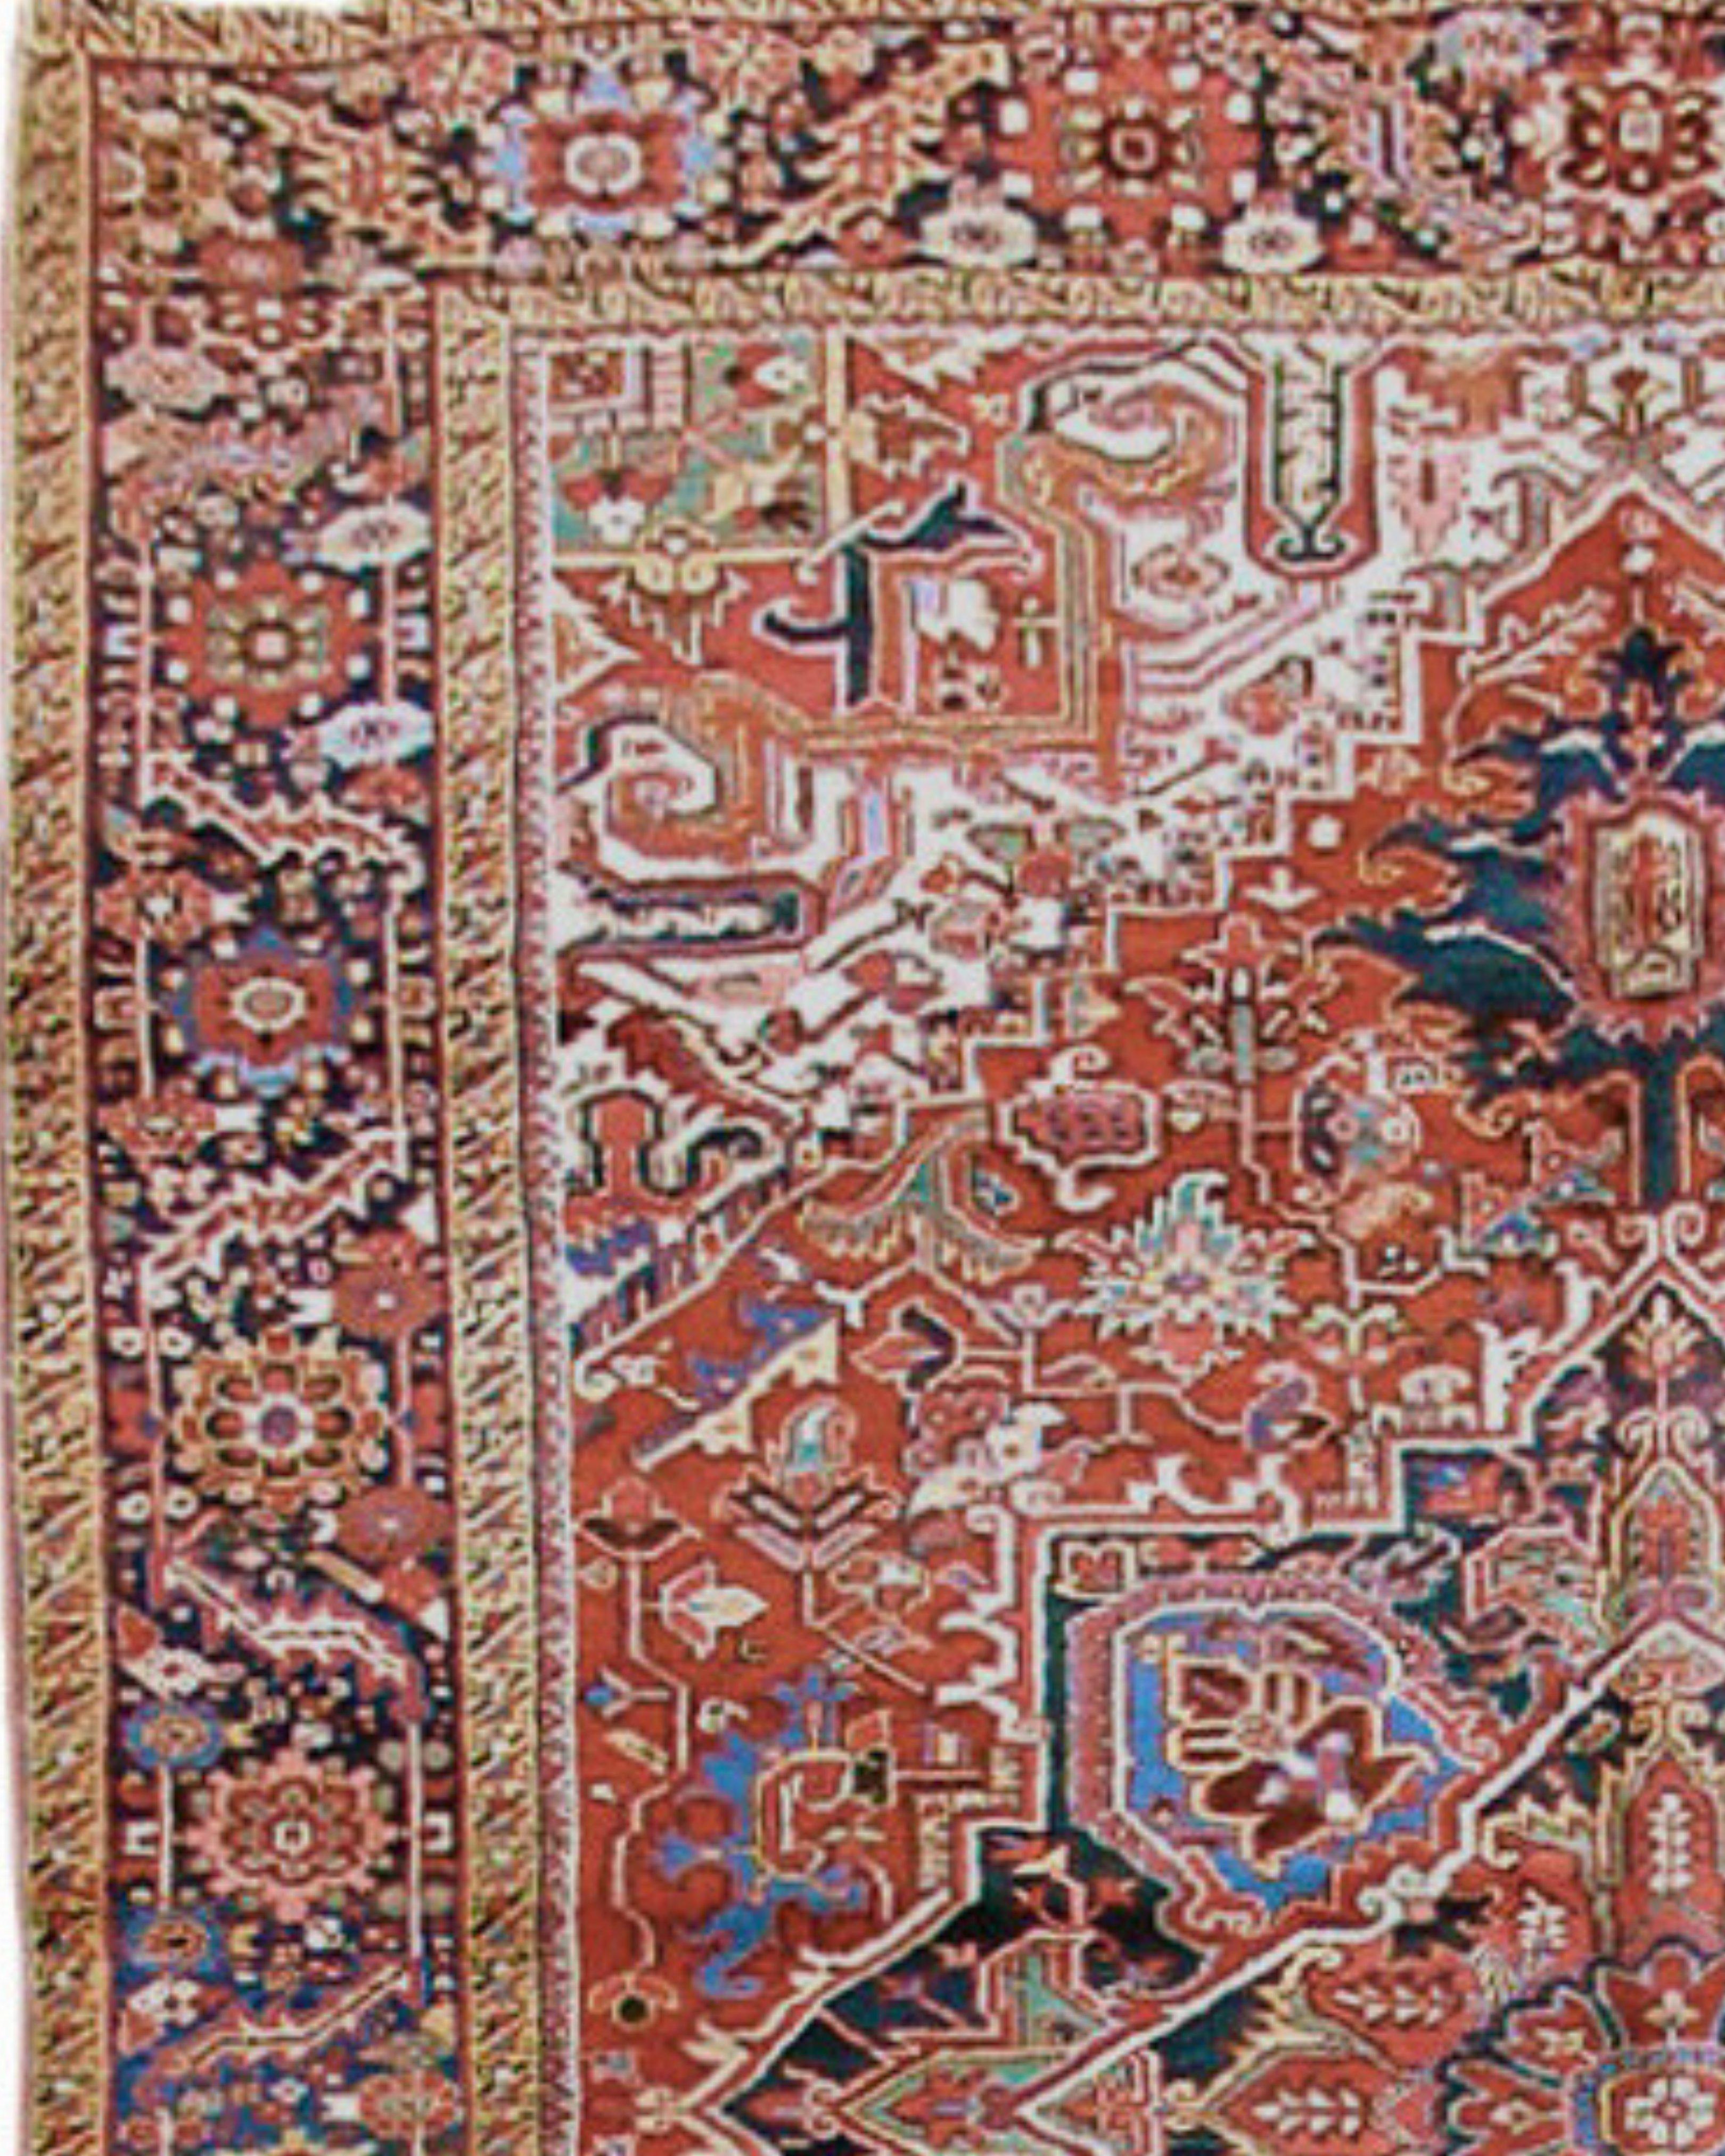 Antique Persian Heriz Rug, Early 20th Century

Additional Information:
Dimensions: 8'8